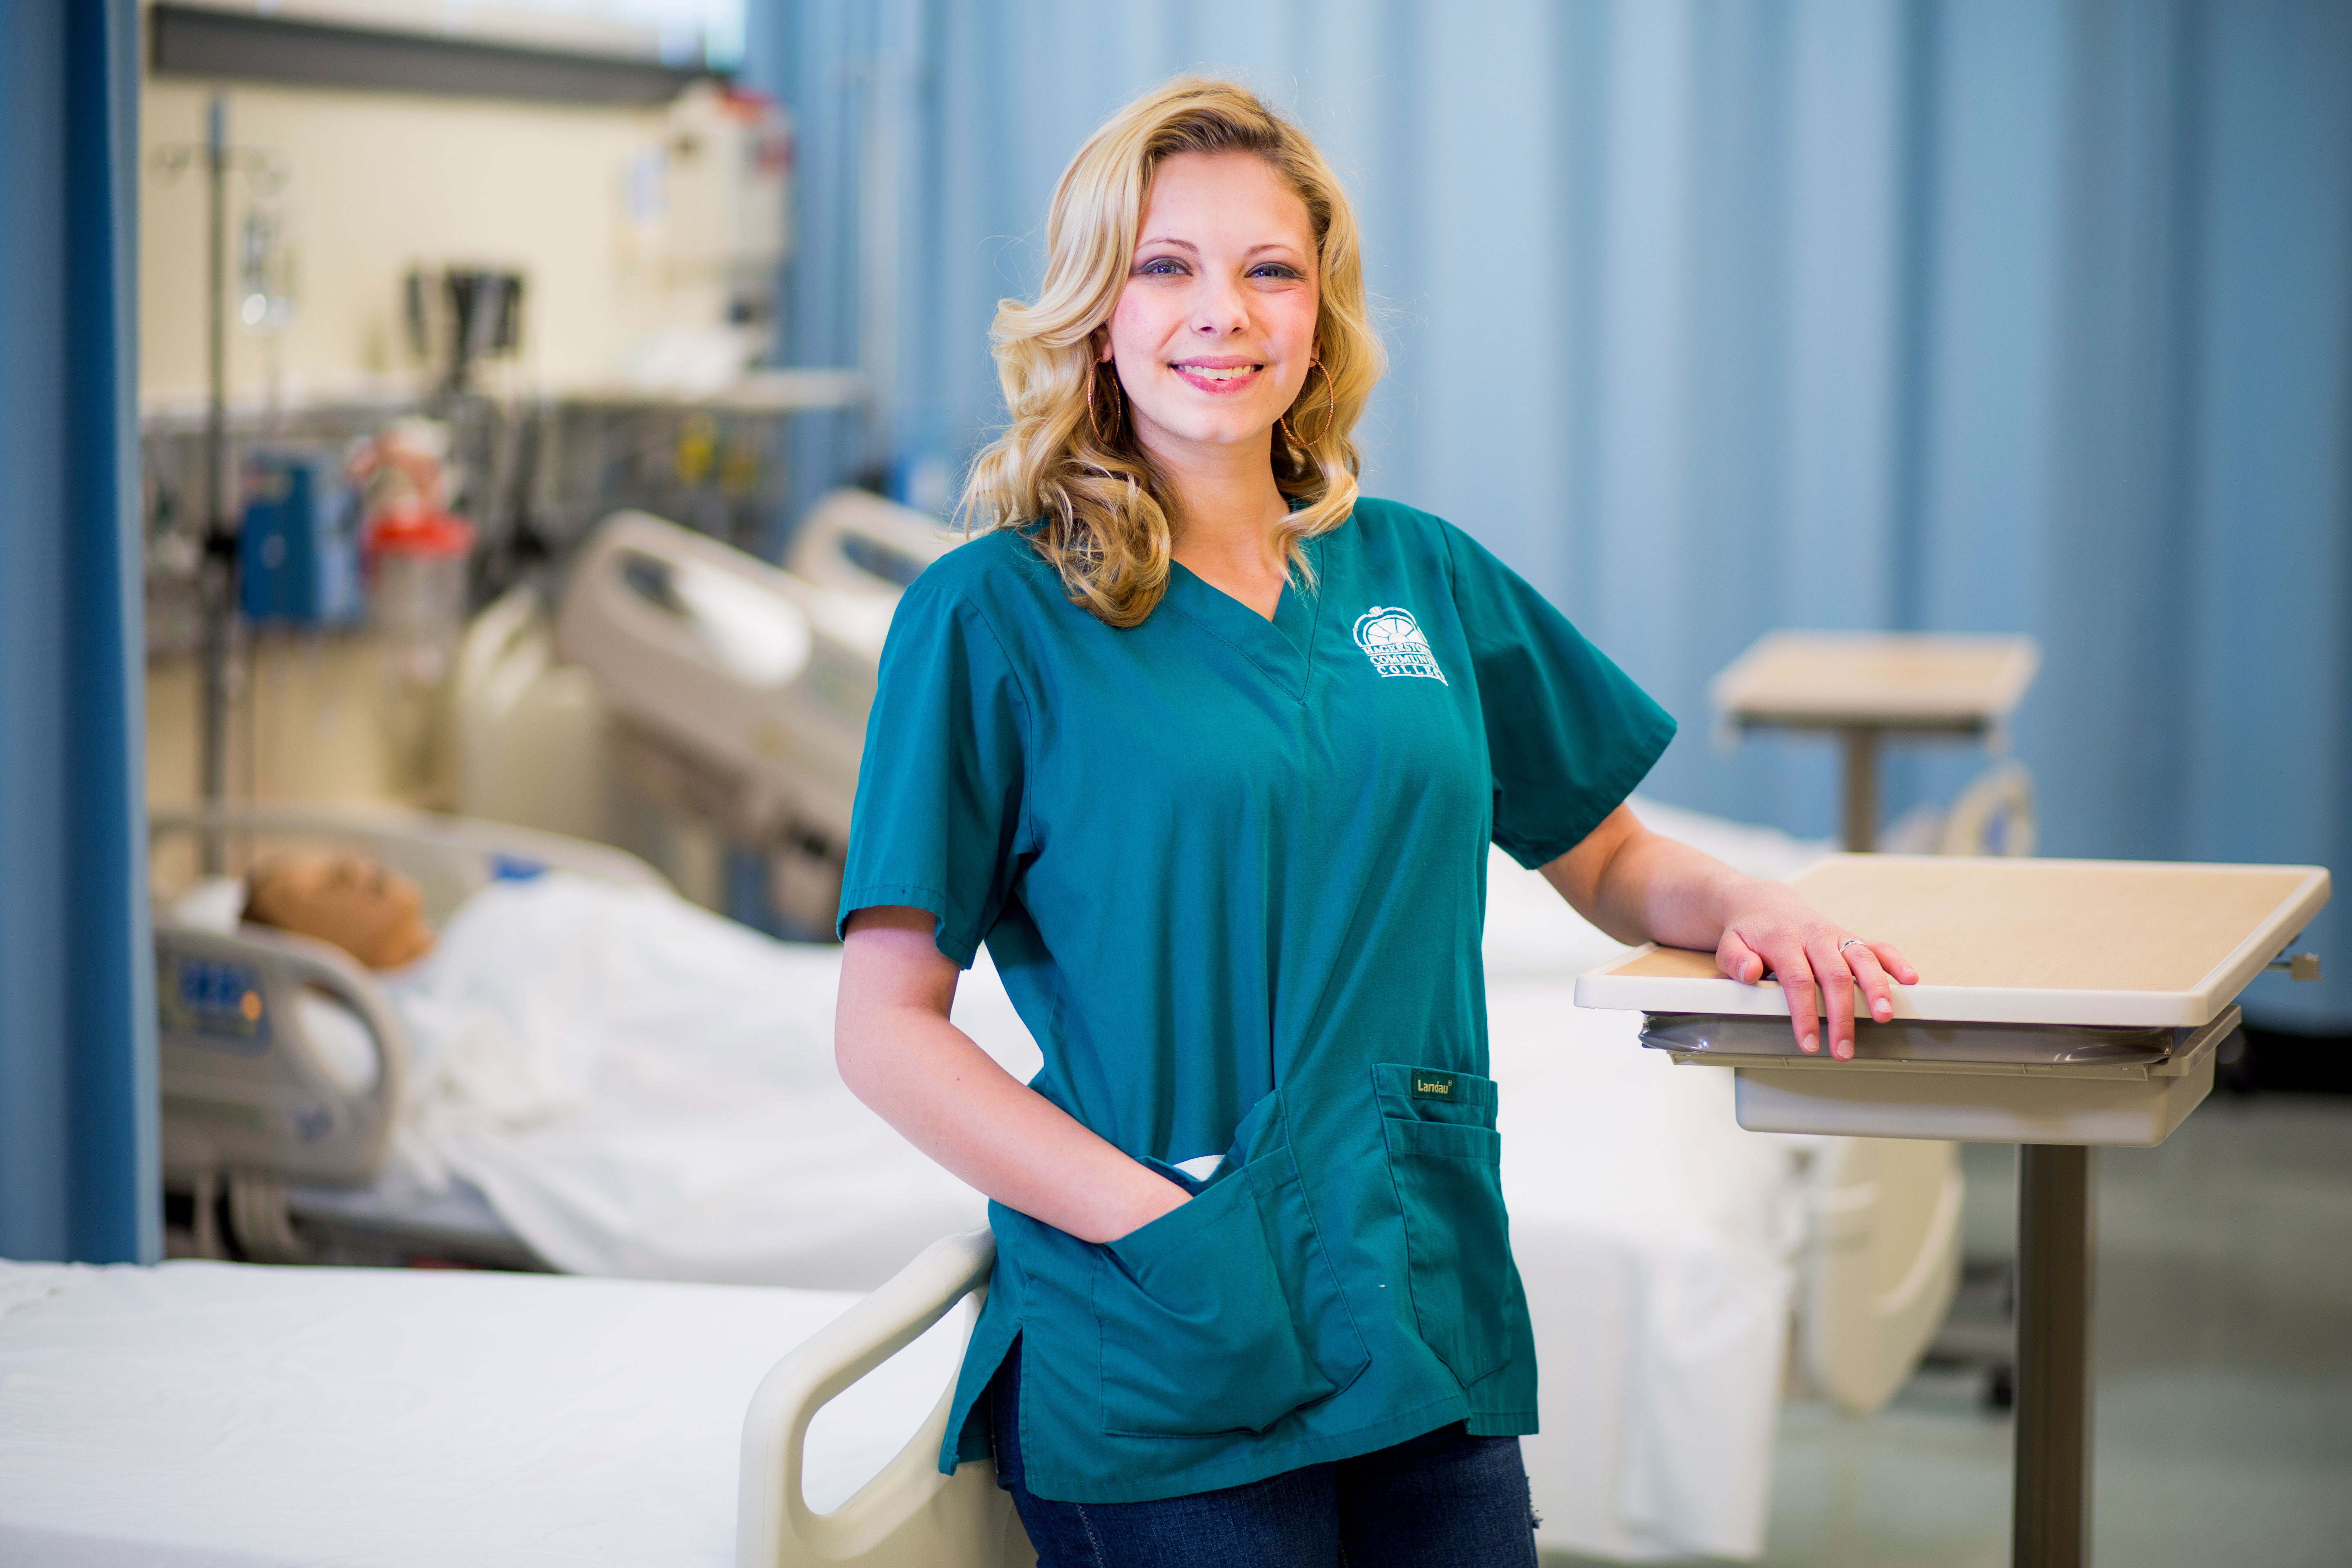 Provisional Admission Rn Bsn Academic Programs